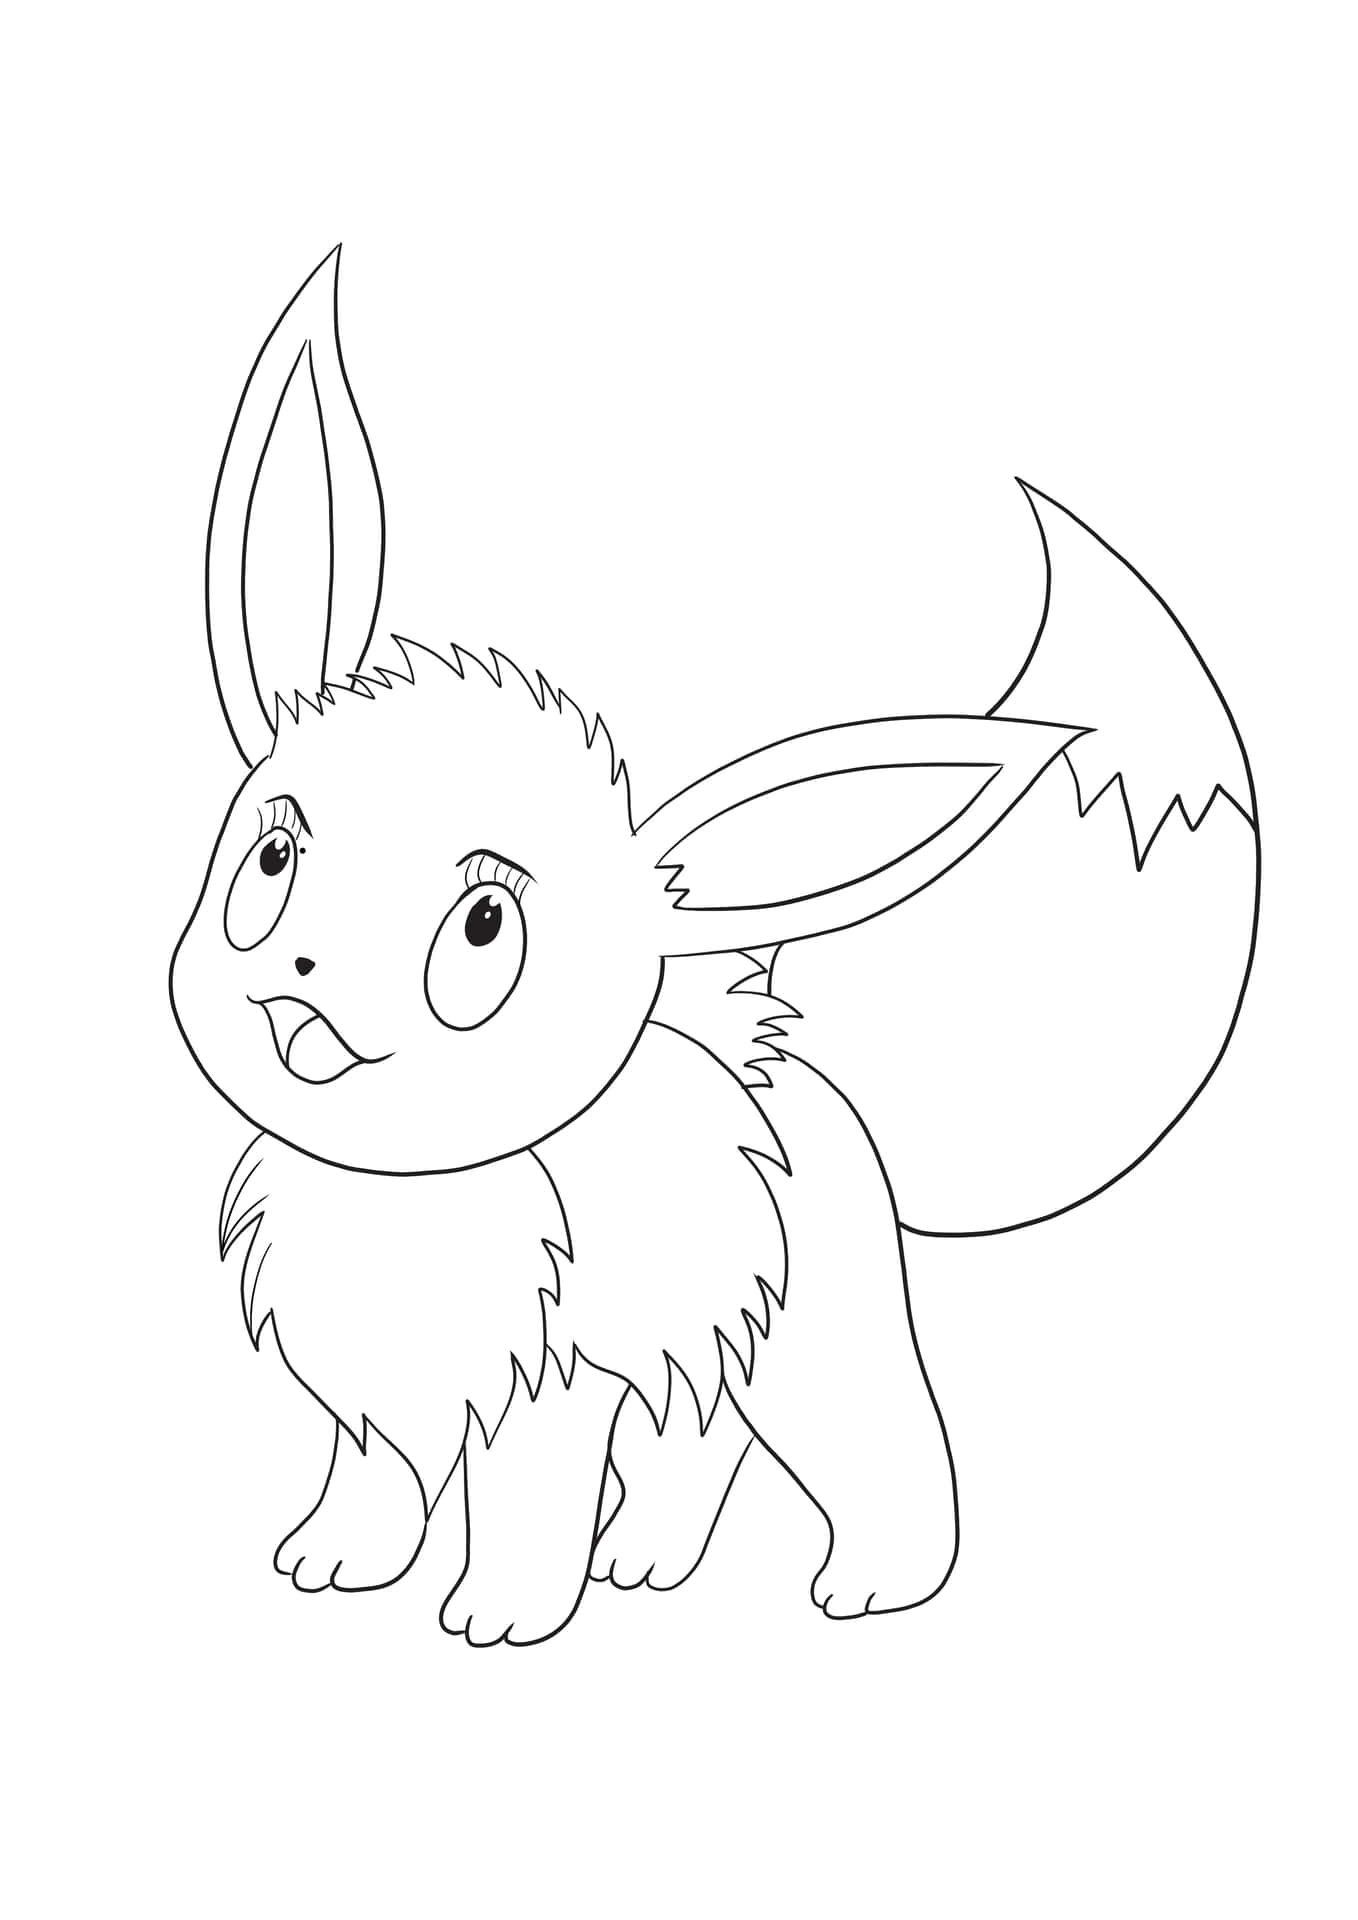 Unleash your inner creative by coloring this Pikachu Pokémon Coloring page!